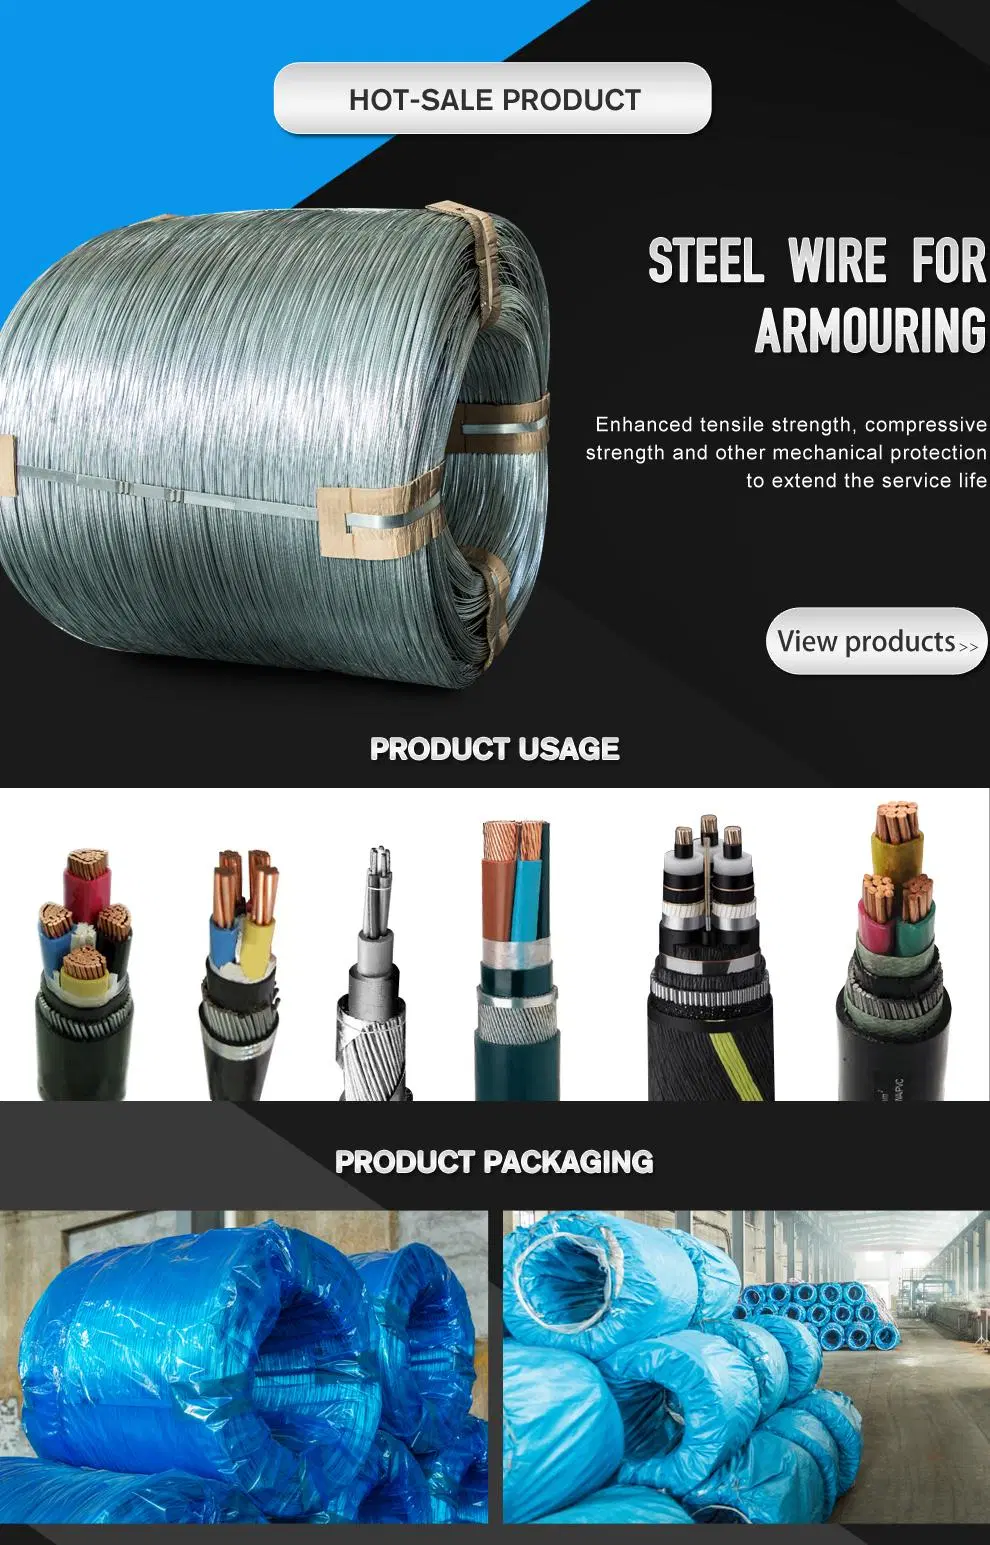 Low Carbon Steel Wire Hot Dipped Heavily Galvanized Iron Wire 2.0 mm 2.5 mm for Cable Armoring